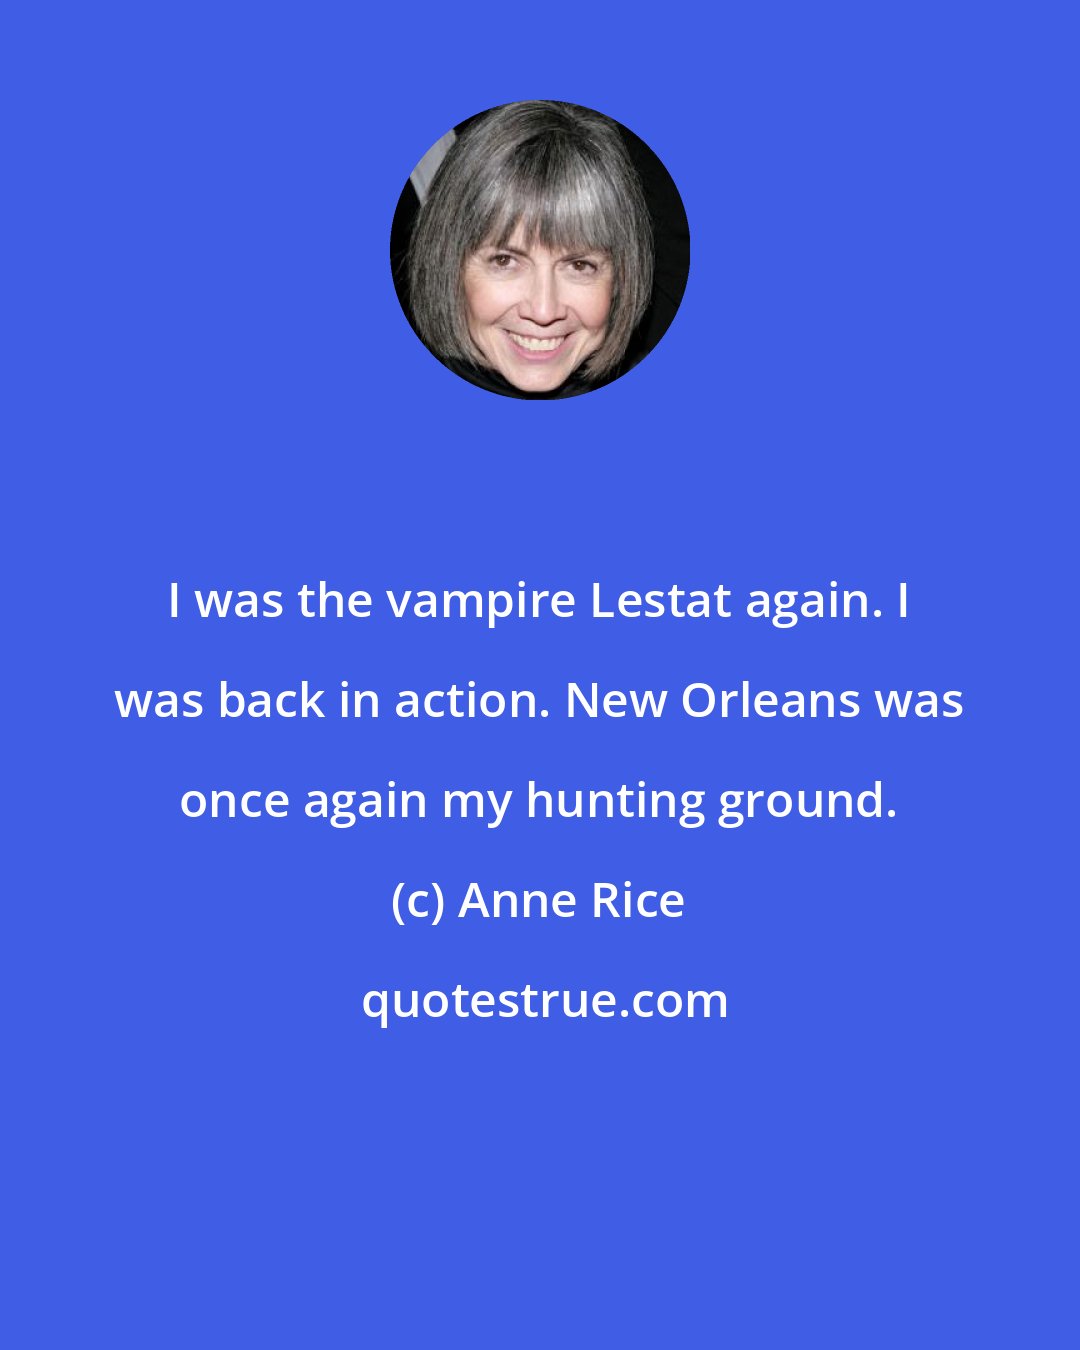 Anne Rice: I was the vampire Lestat again. I was back in action. New Orleans was once again my hunting ground.